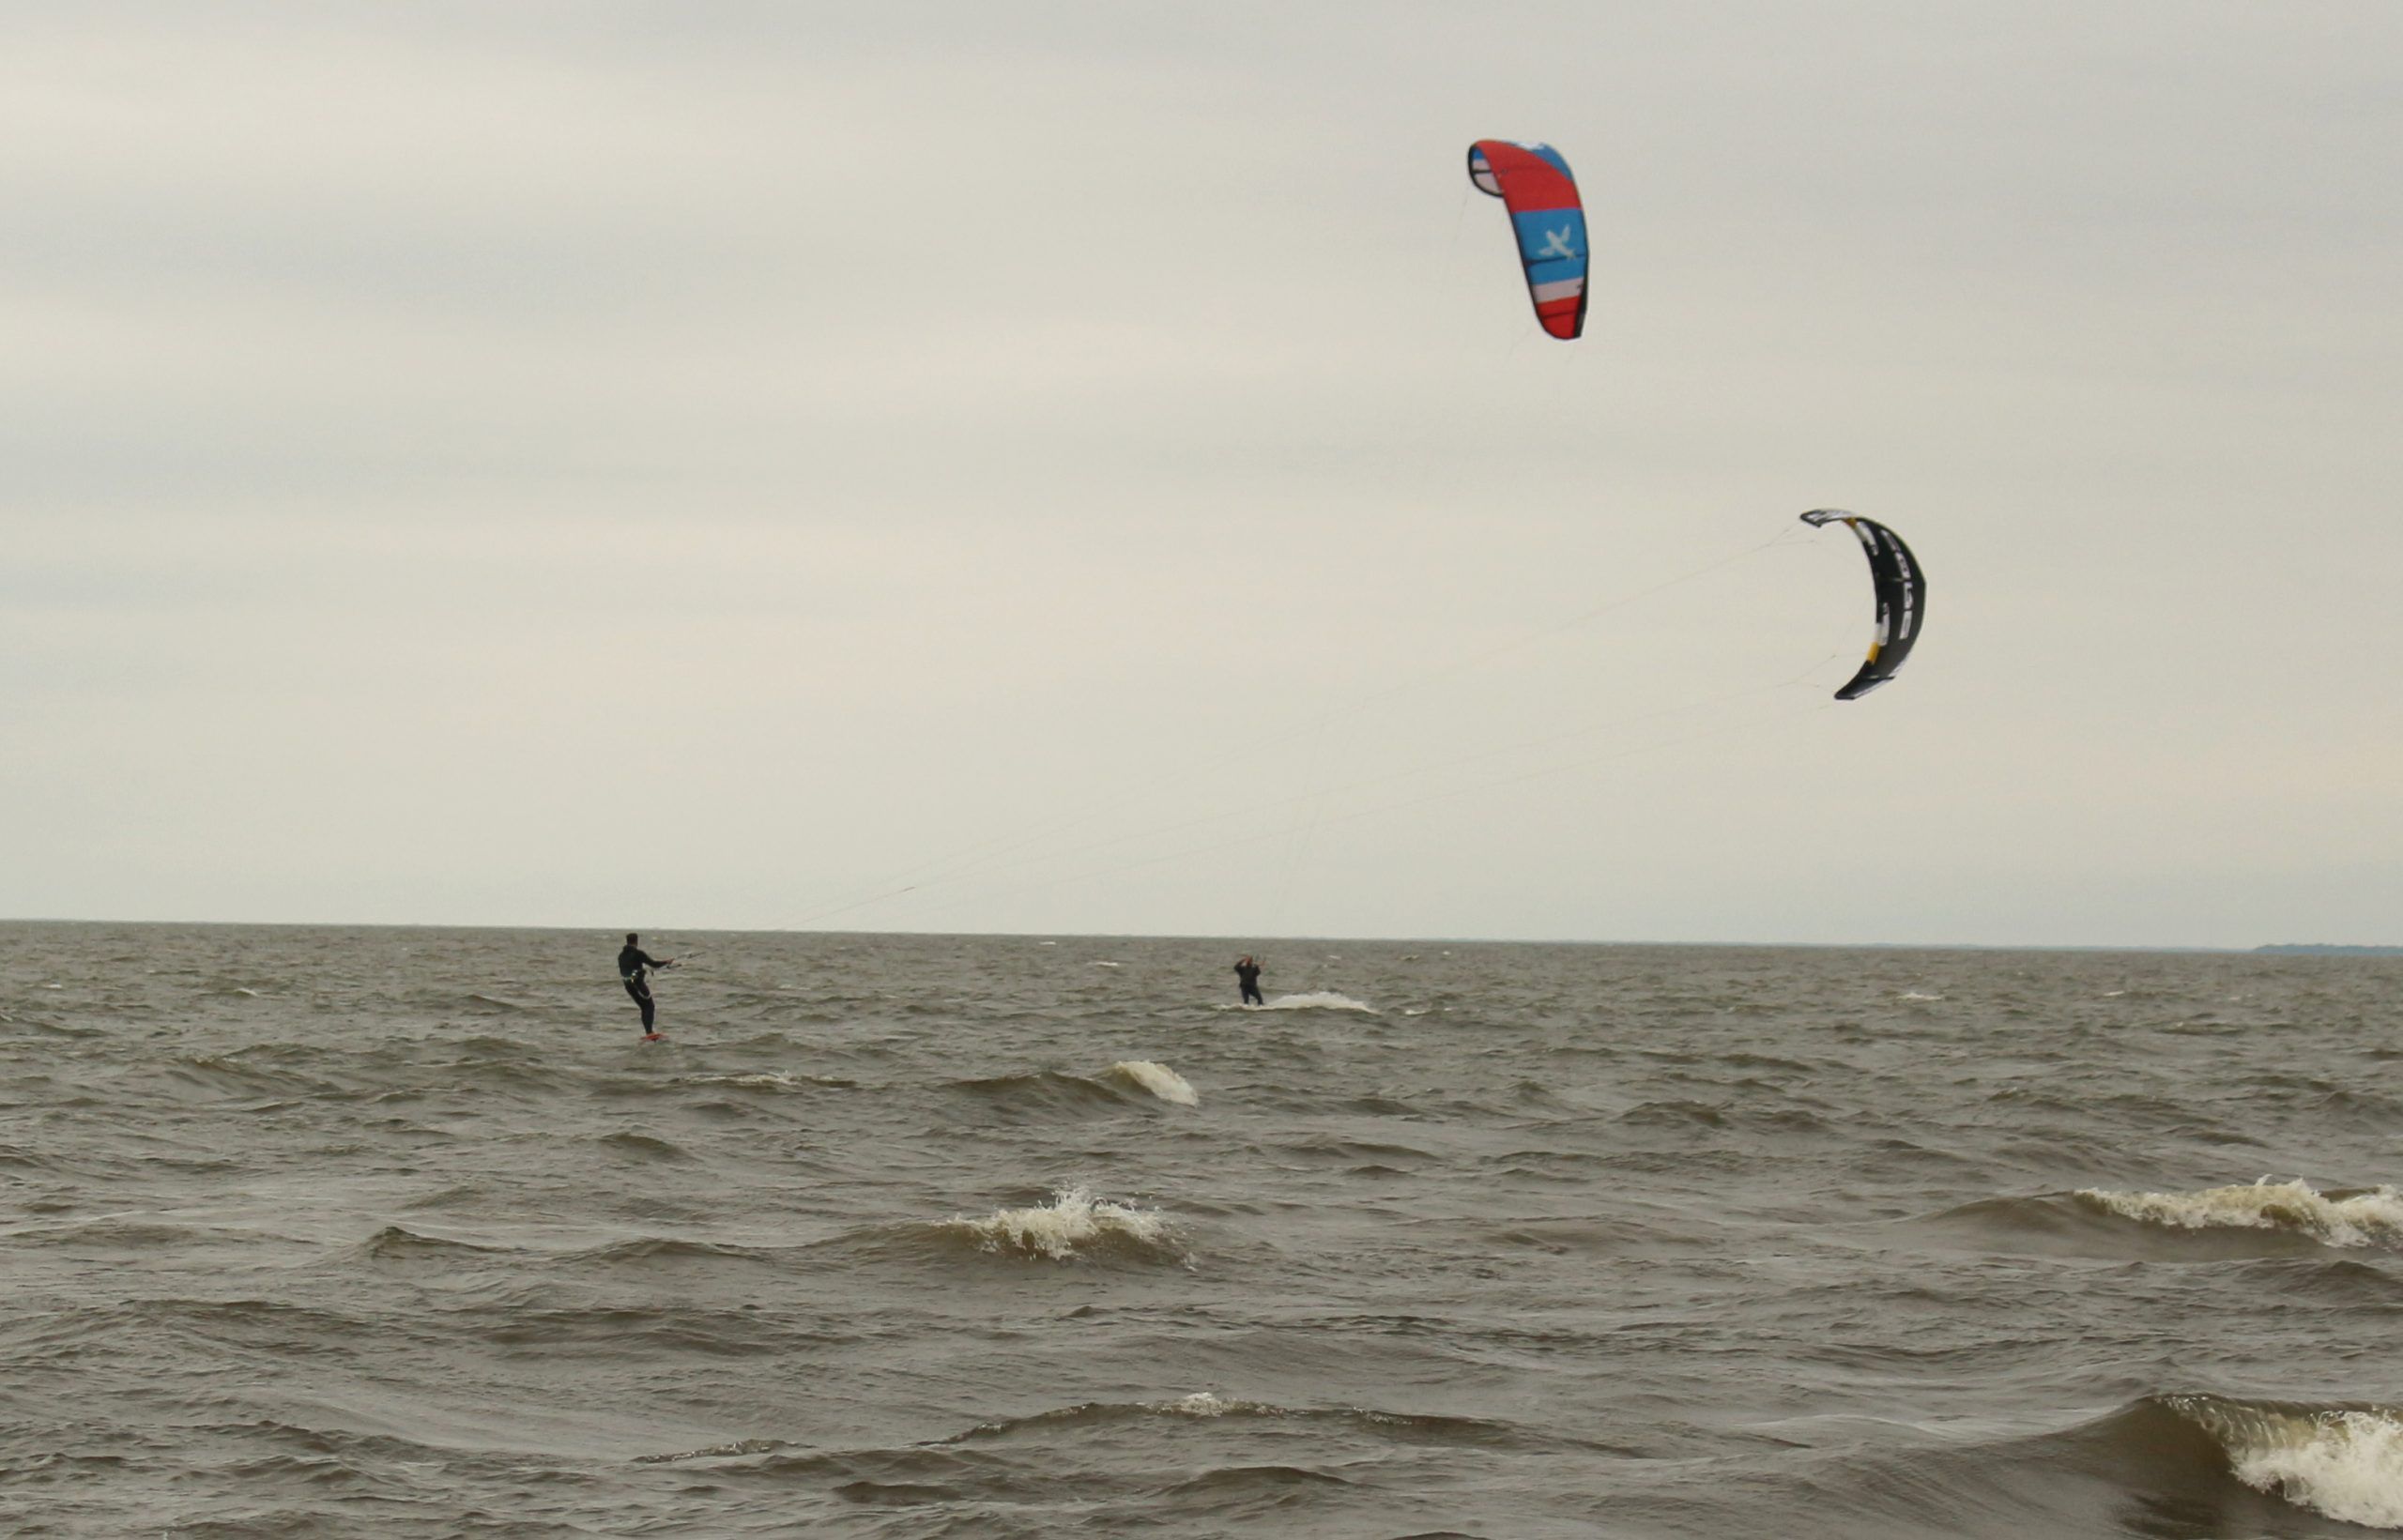 Kite boarders take last kick at the waves – The North Bay Nugget